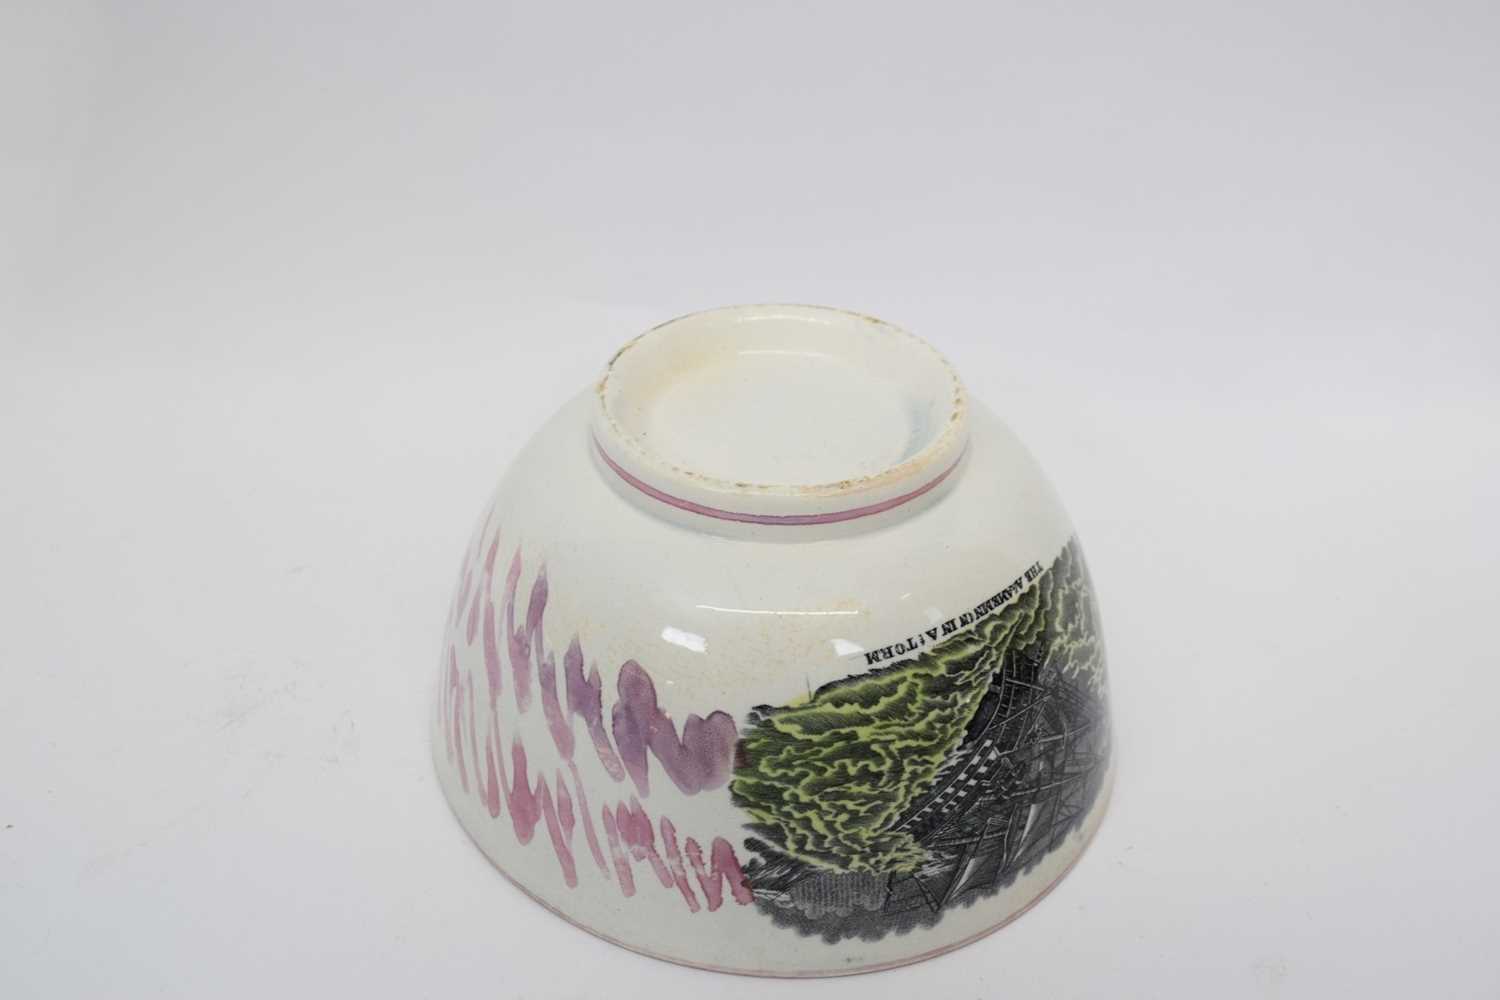 Sunderland lustre bowl with a view of Sunderland Bridge and the Agamemnon in a storm verso, 19cm - Image 5 of 5